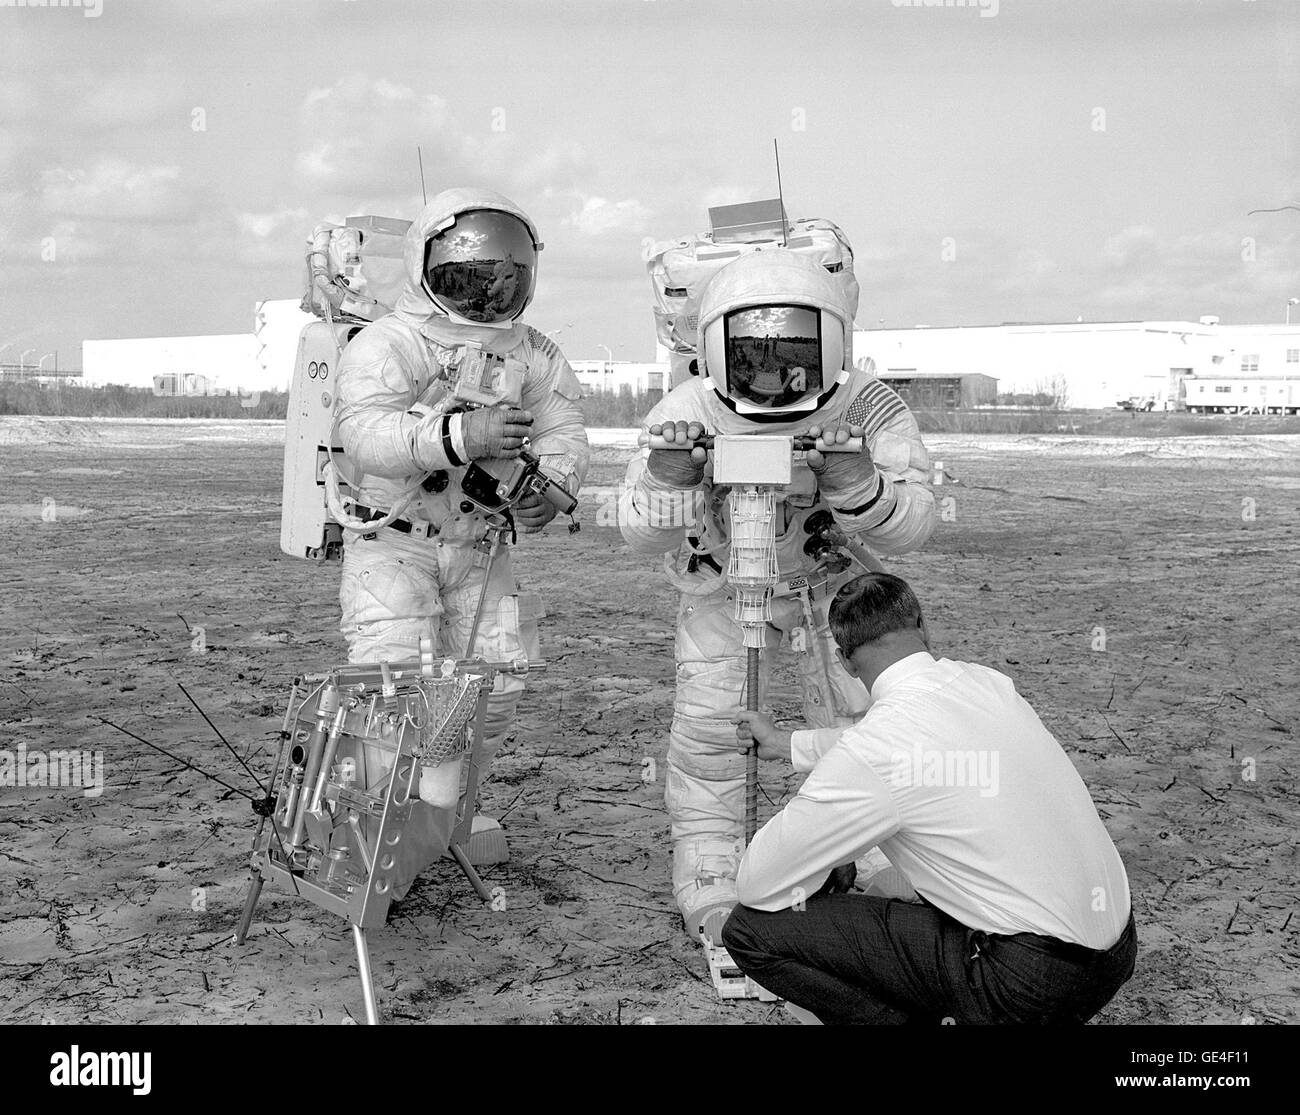 (January 28, 1970) The two members of the Apollo 13 crew who planned to land on the Moon's Fra Mauro region in the lunar module underwent a walk-through of the extravehicular activity timeline. Fred W. haise, Jr., Lunar Module Pilot, tries out a motorized core sampler, right, while James A. Lovell, Jr., the Apollo 13 Commander, looks on at left.  Image # : 70P-0046 Stock Photo